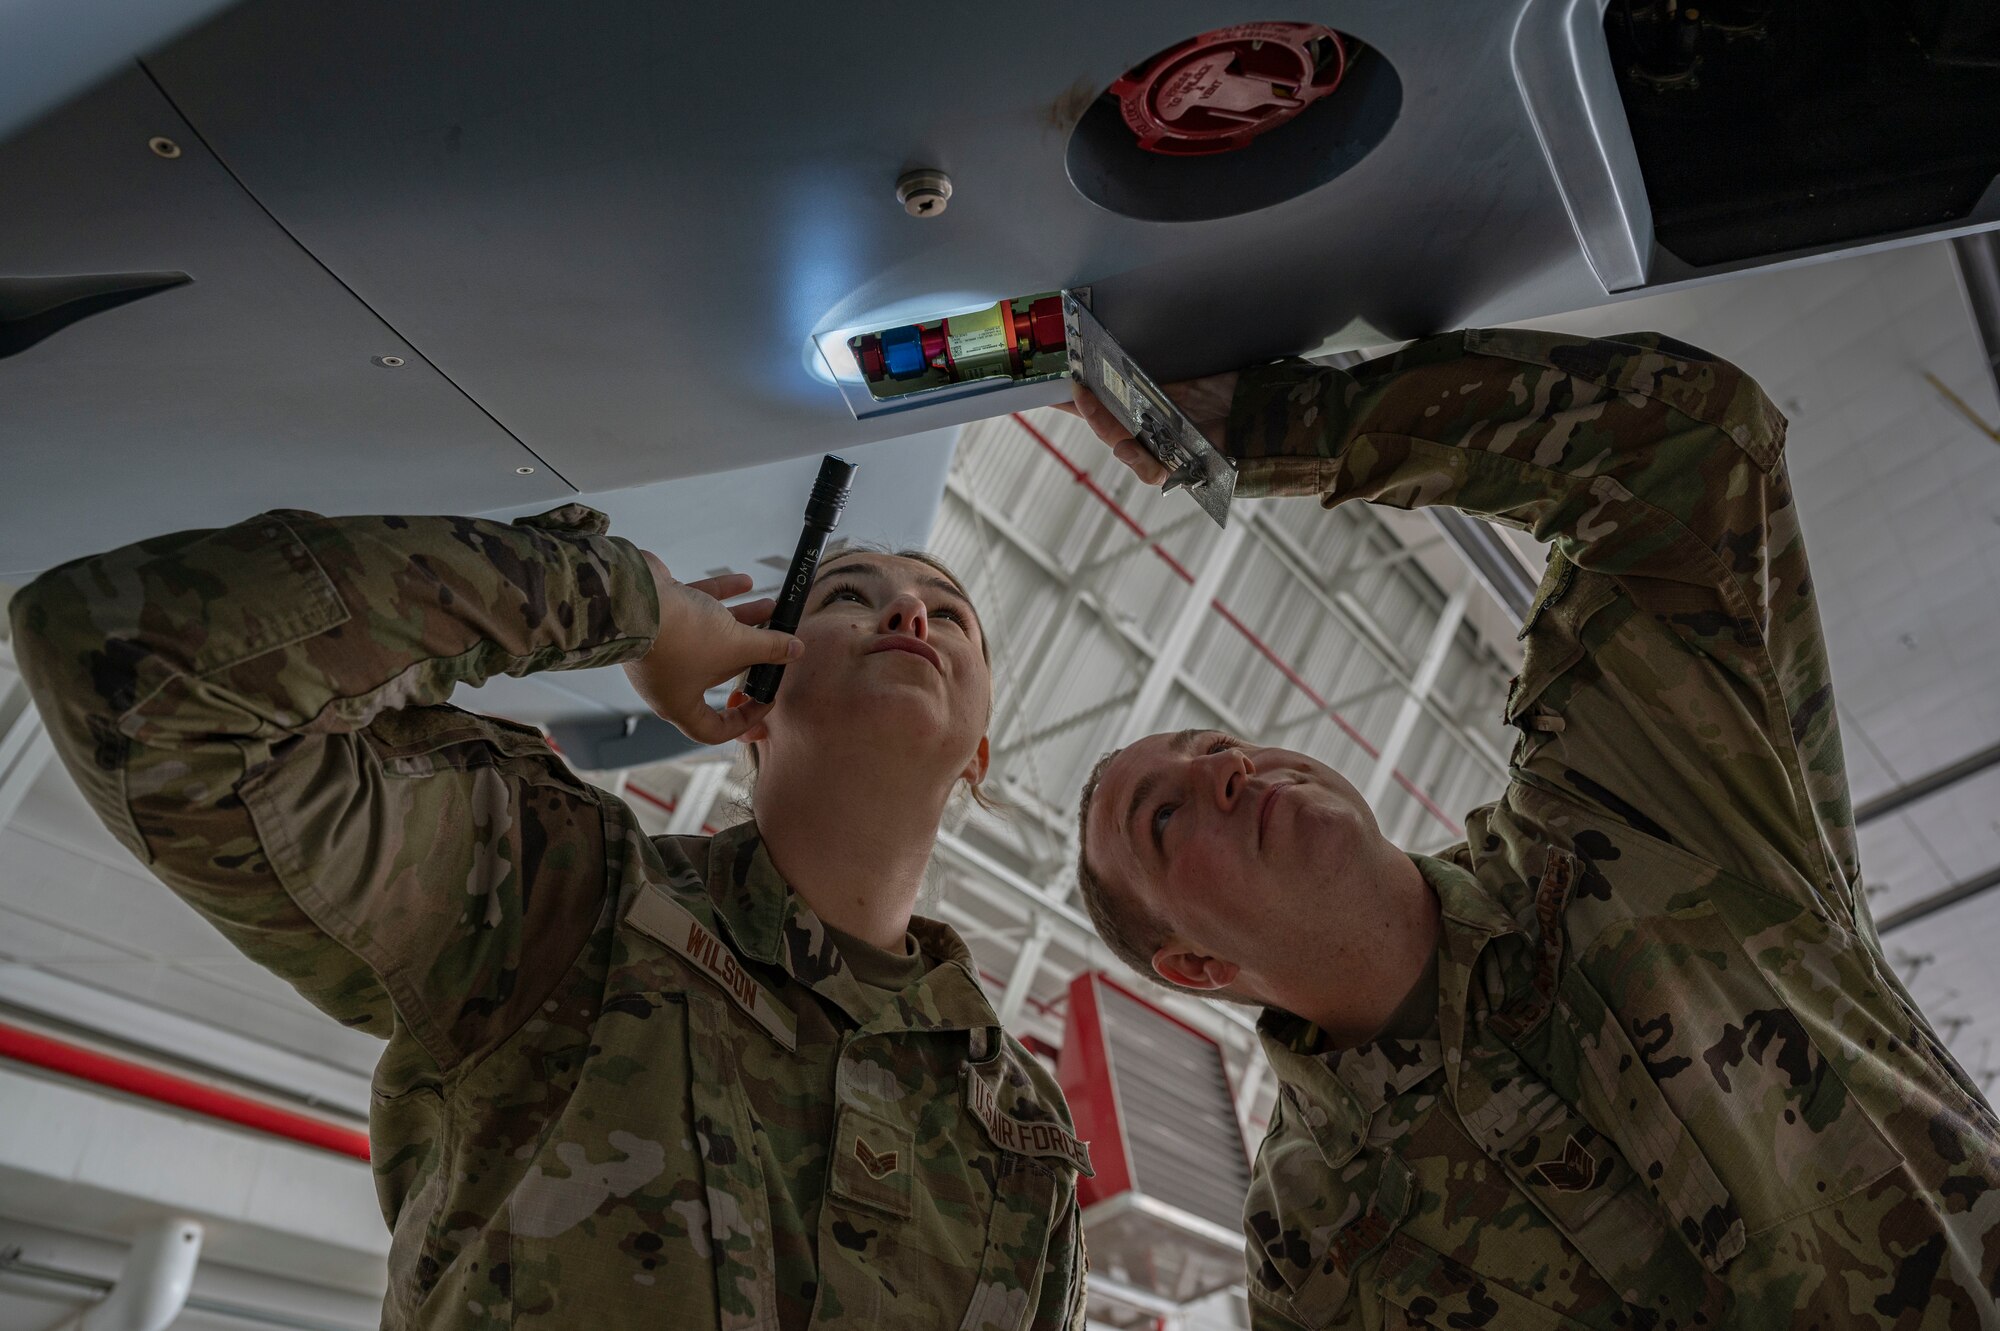 U.S. Air Force Senior Airman Morgan Wilson, 174th Attack Wing crew chief, left, and U.S. Air Force Tech. Sgt. Mathew Main, 491st Attack Squadron crew chief, conduct an inspection of an MQ-9 Reaper at Hancock Field Air National Guard Base, New York, June 29, 2023. The 491st ATKS is composed of both active duty and Air National Guard personnel responsible for training student pilots and sensor operators how to operate an MQ-9 Reaper. (U.S. Air Force photo by Airman 1st Class Isaiah Pedrazzini)